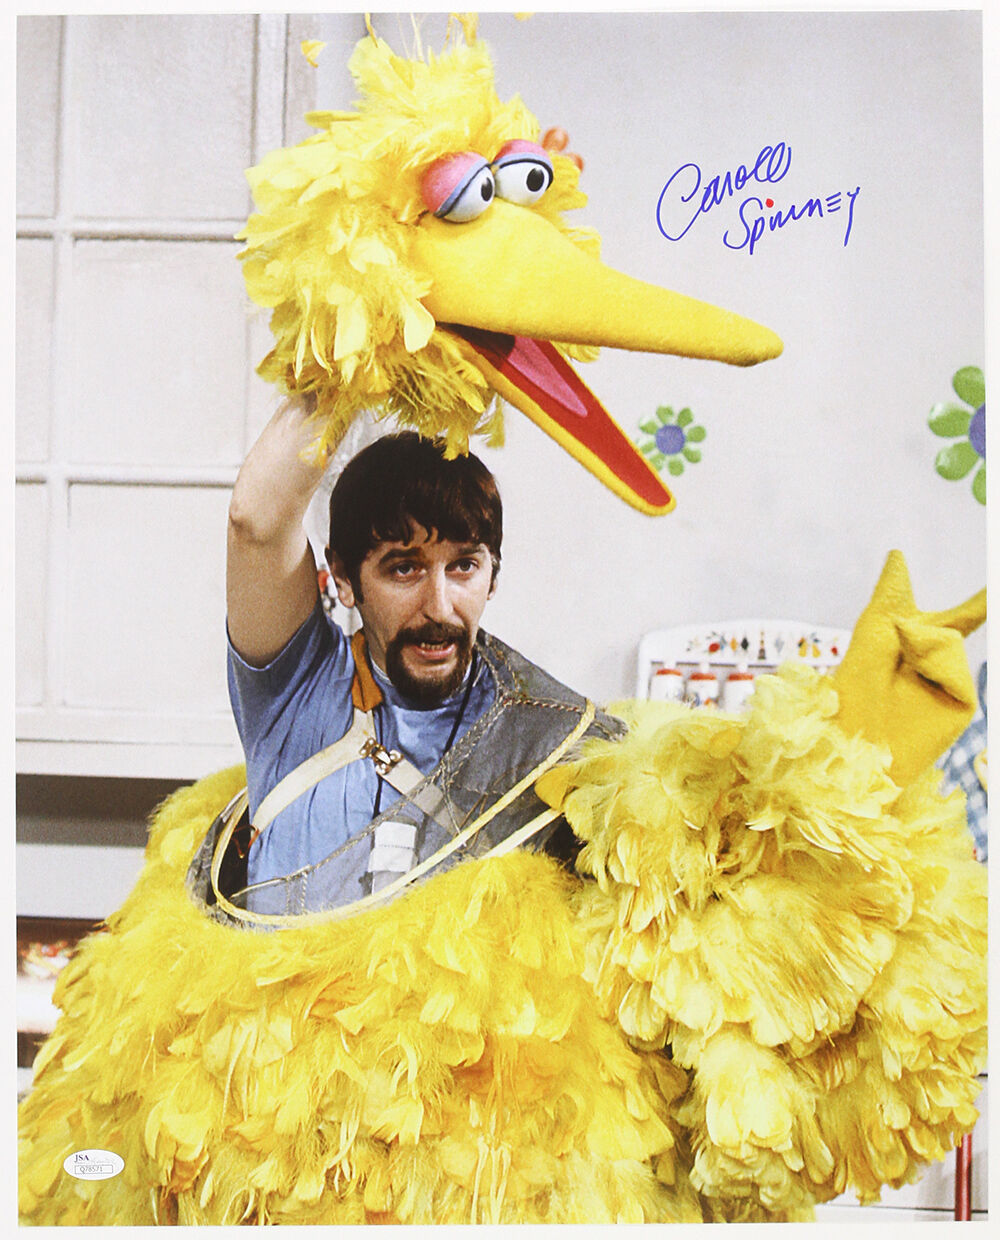 1970s Carroll Spinney in “Big Bird” Costume LE Signed 16x20 Color Photo (JSA) 